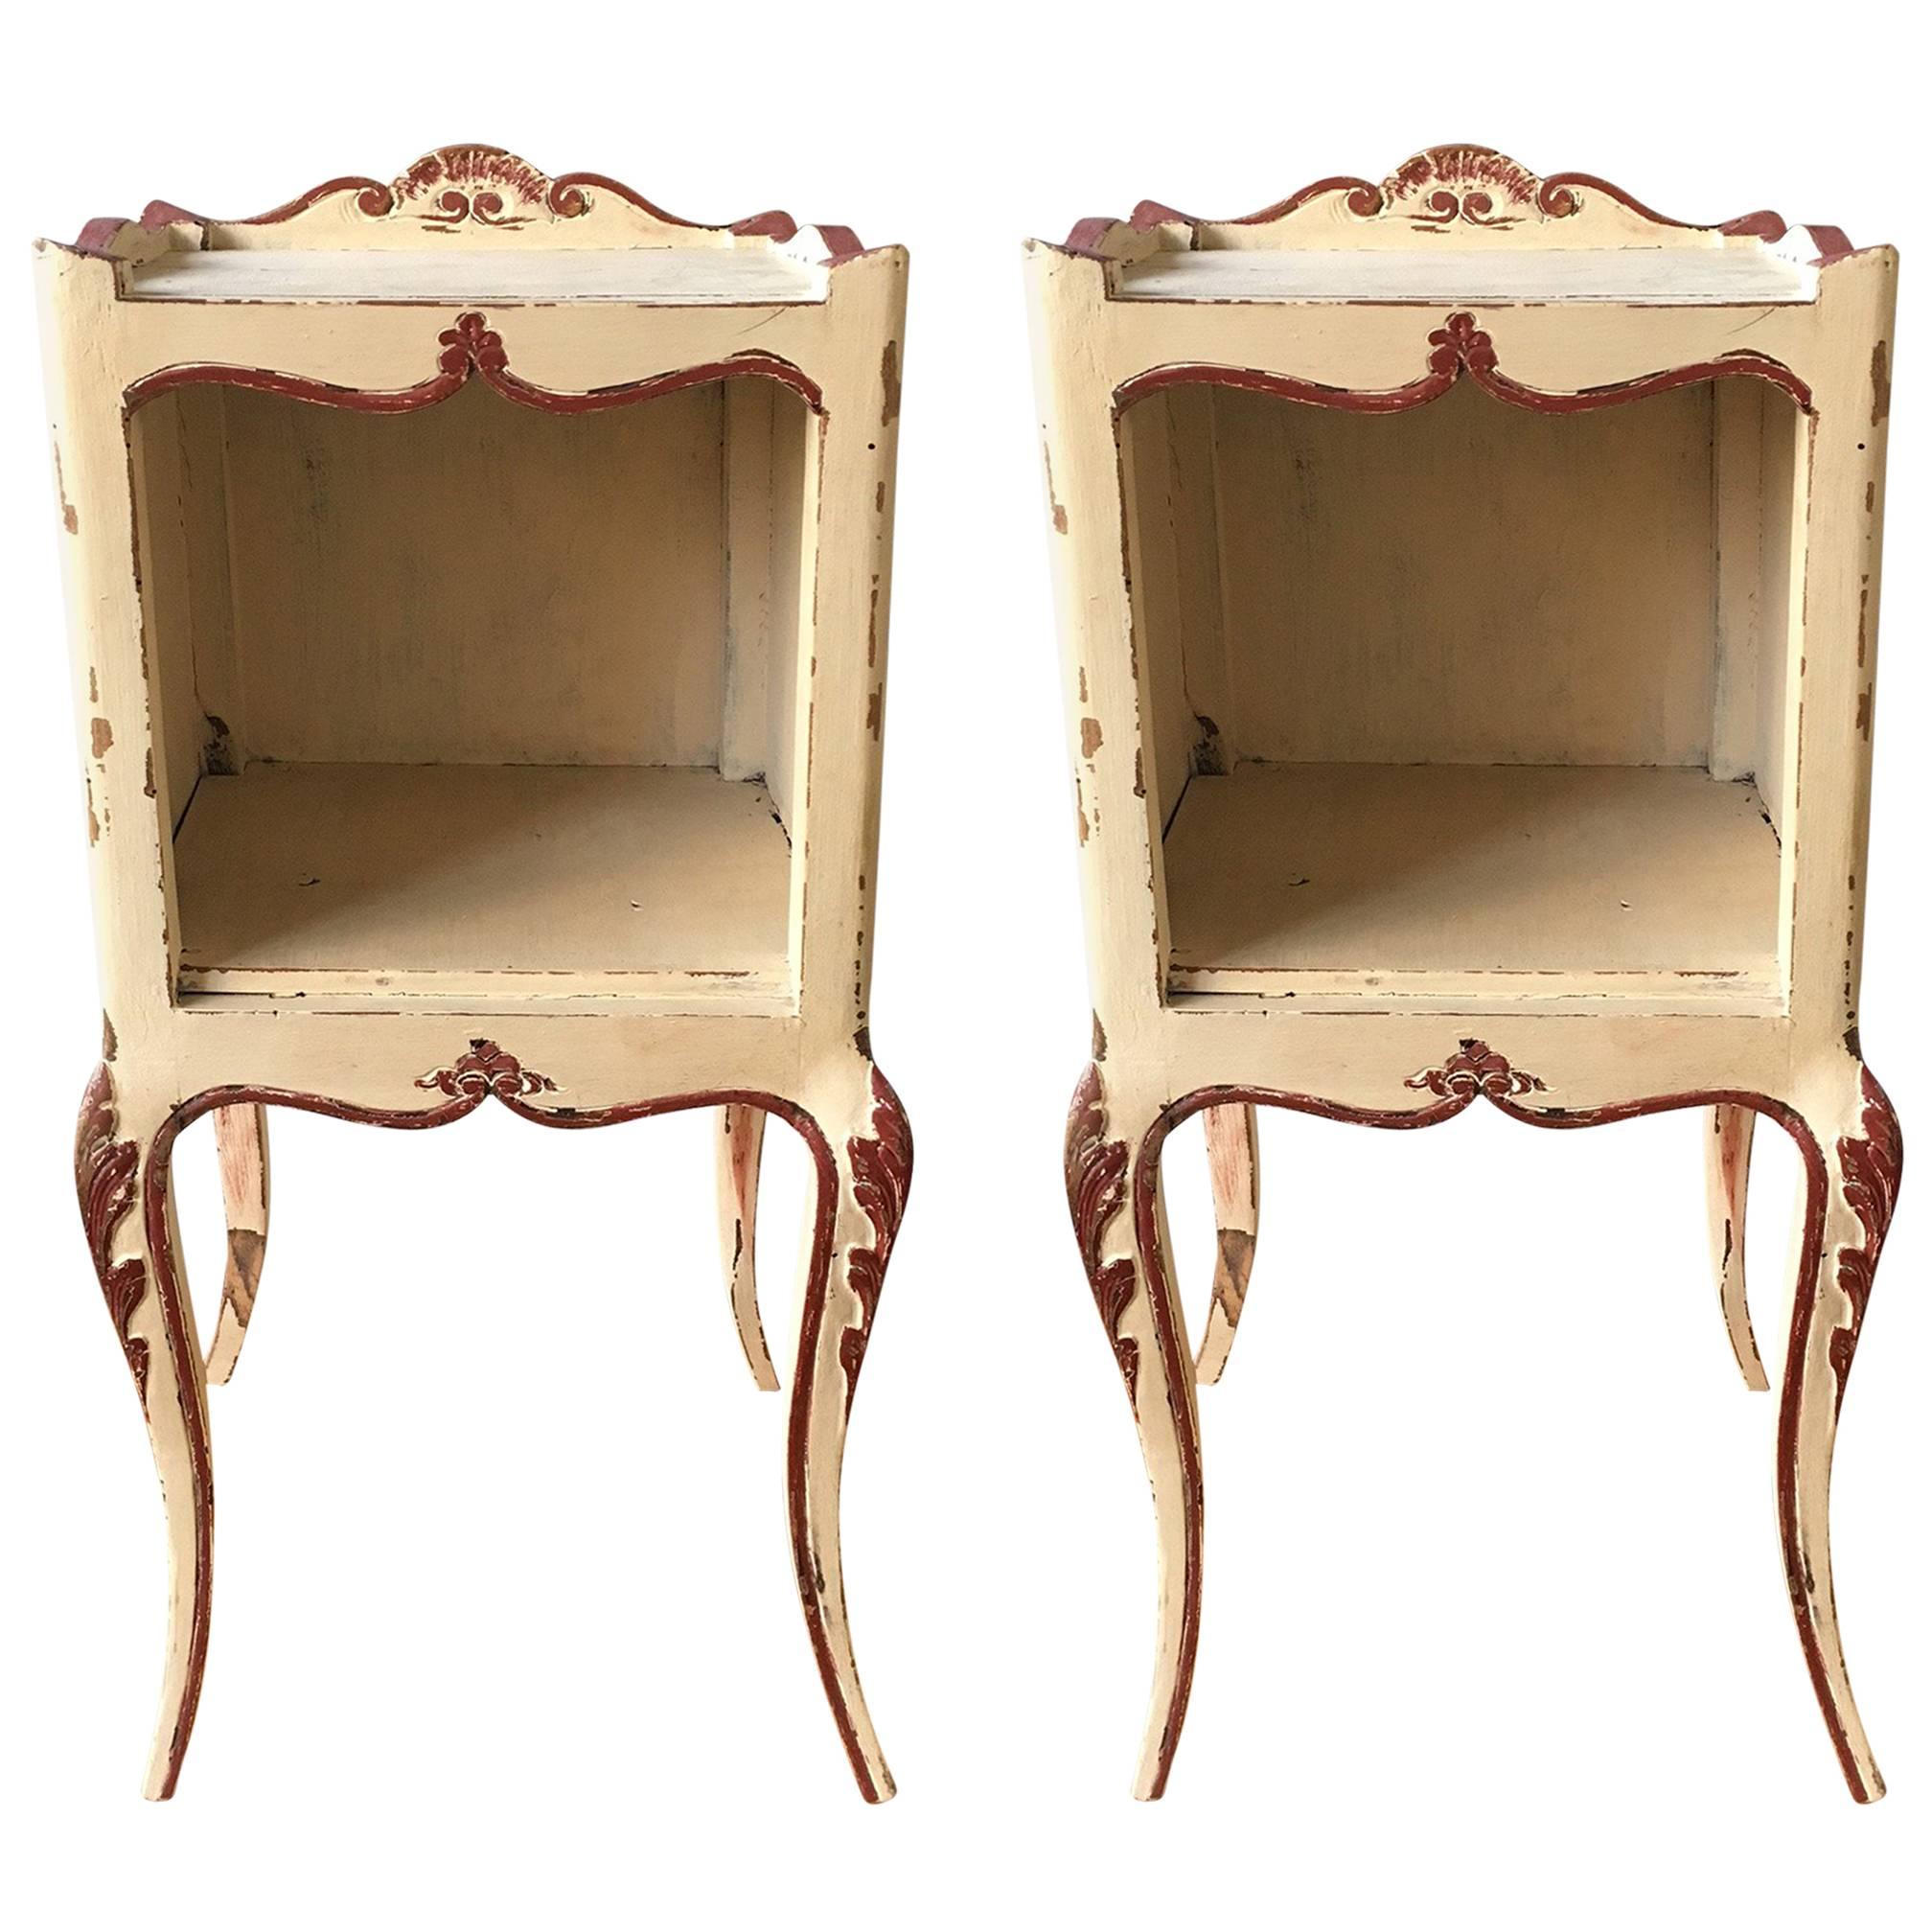 19th Century French Elegant Solid Wood Nightstands in Louis XV Style